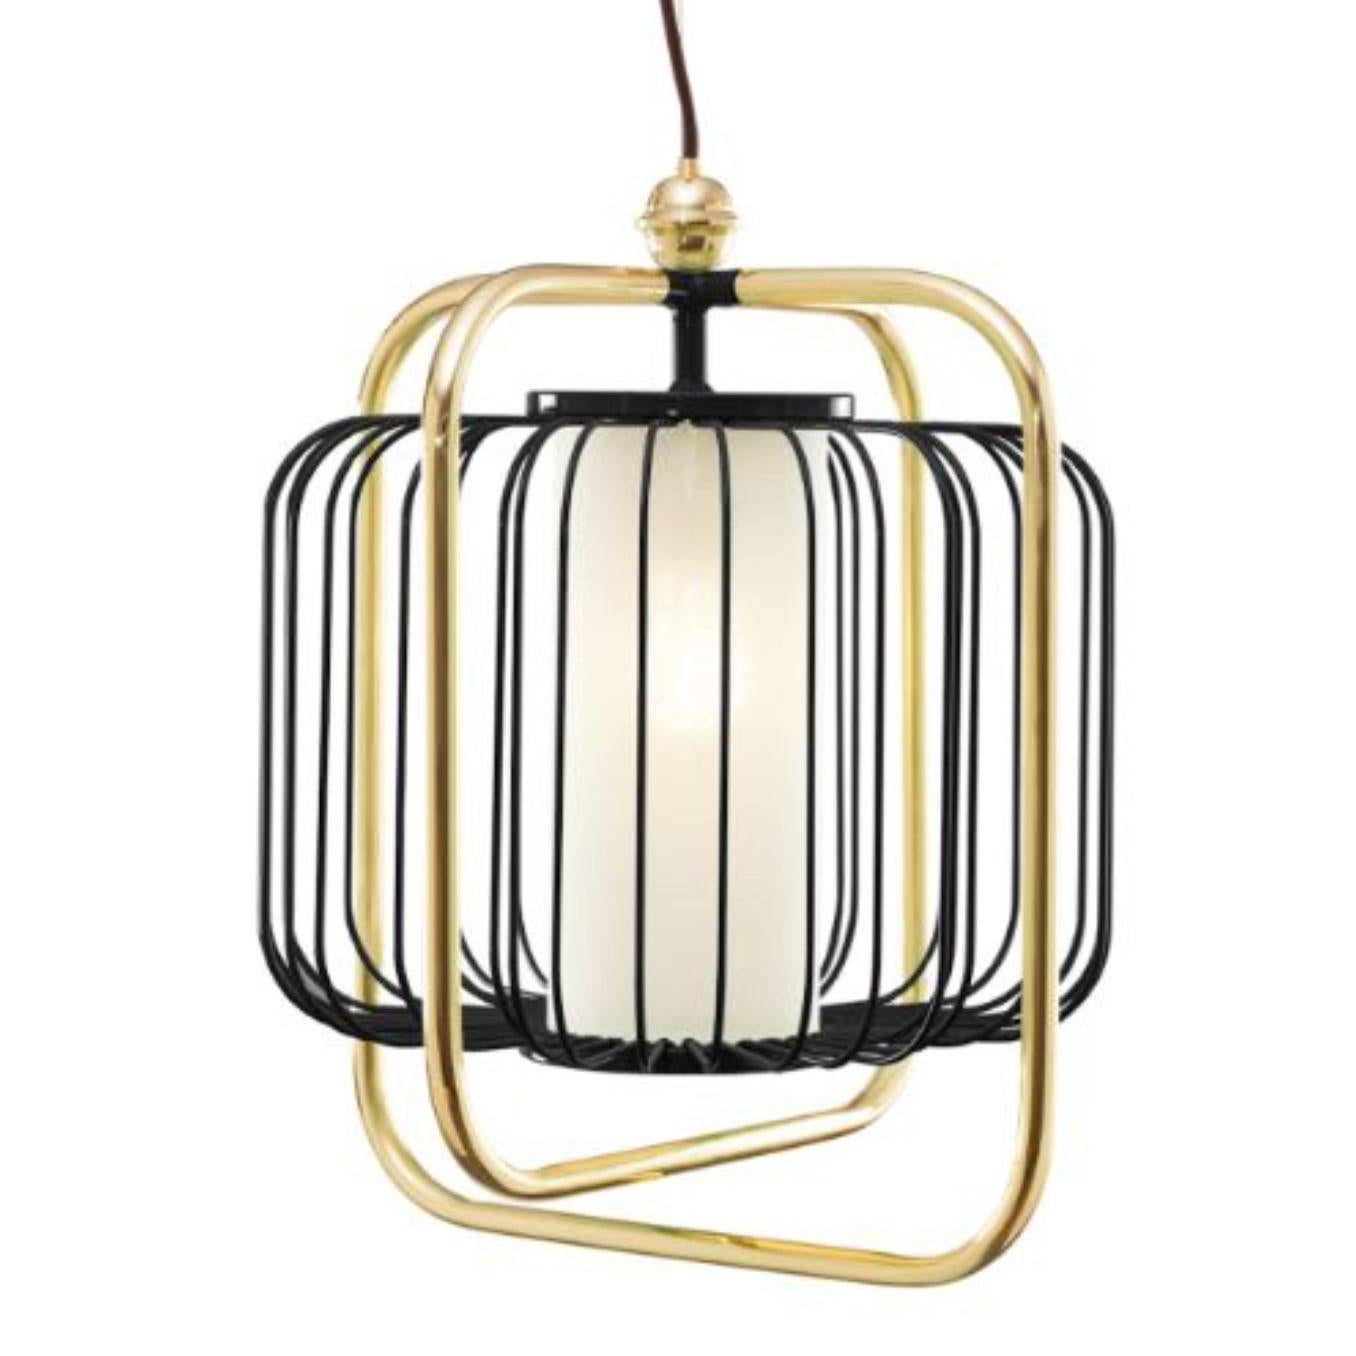 Brass and black Jules III suspension lamp by Dooq
Dimensions: W 38 x D 38 x H 44 cm
Materials: lacquered metal, polished or brushed metal, brass.
abat-jour: cotton
Also available in different colours and materials.

Information:
230V/50Hz
E27/1x20W